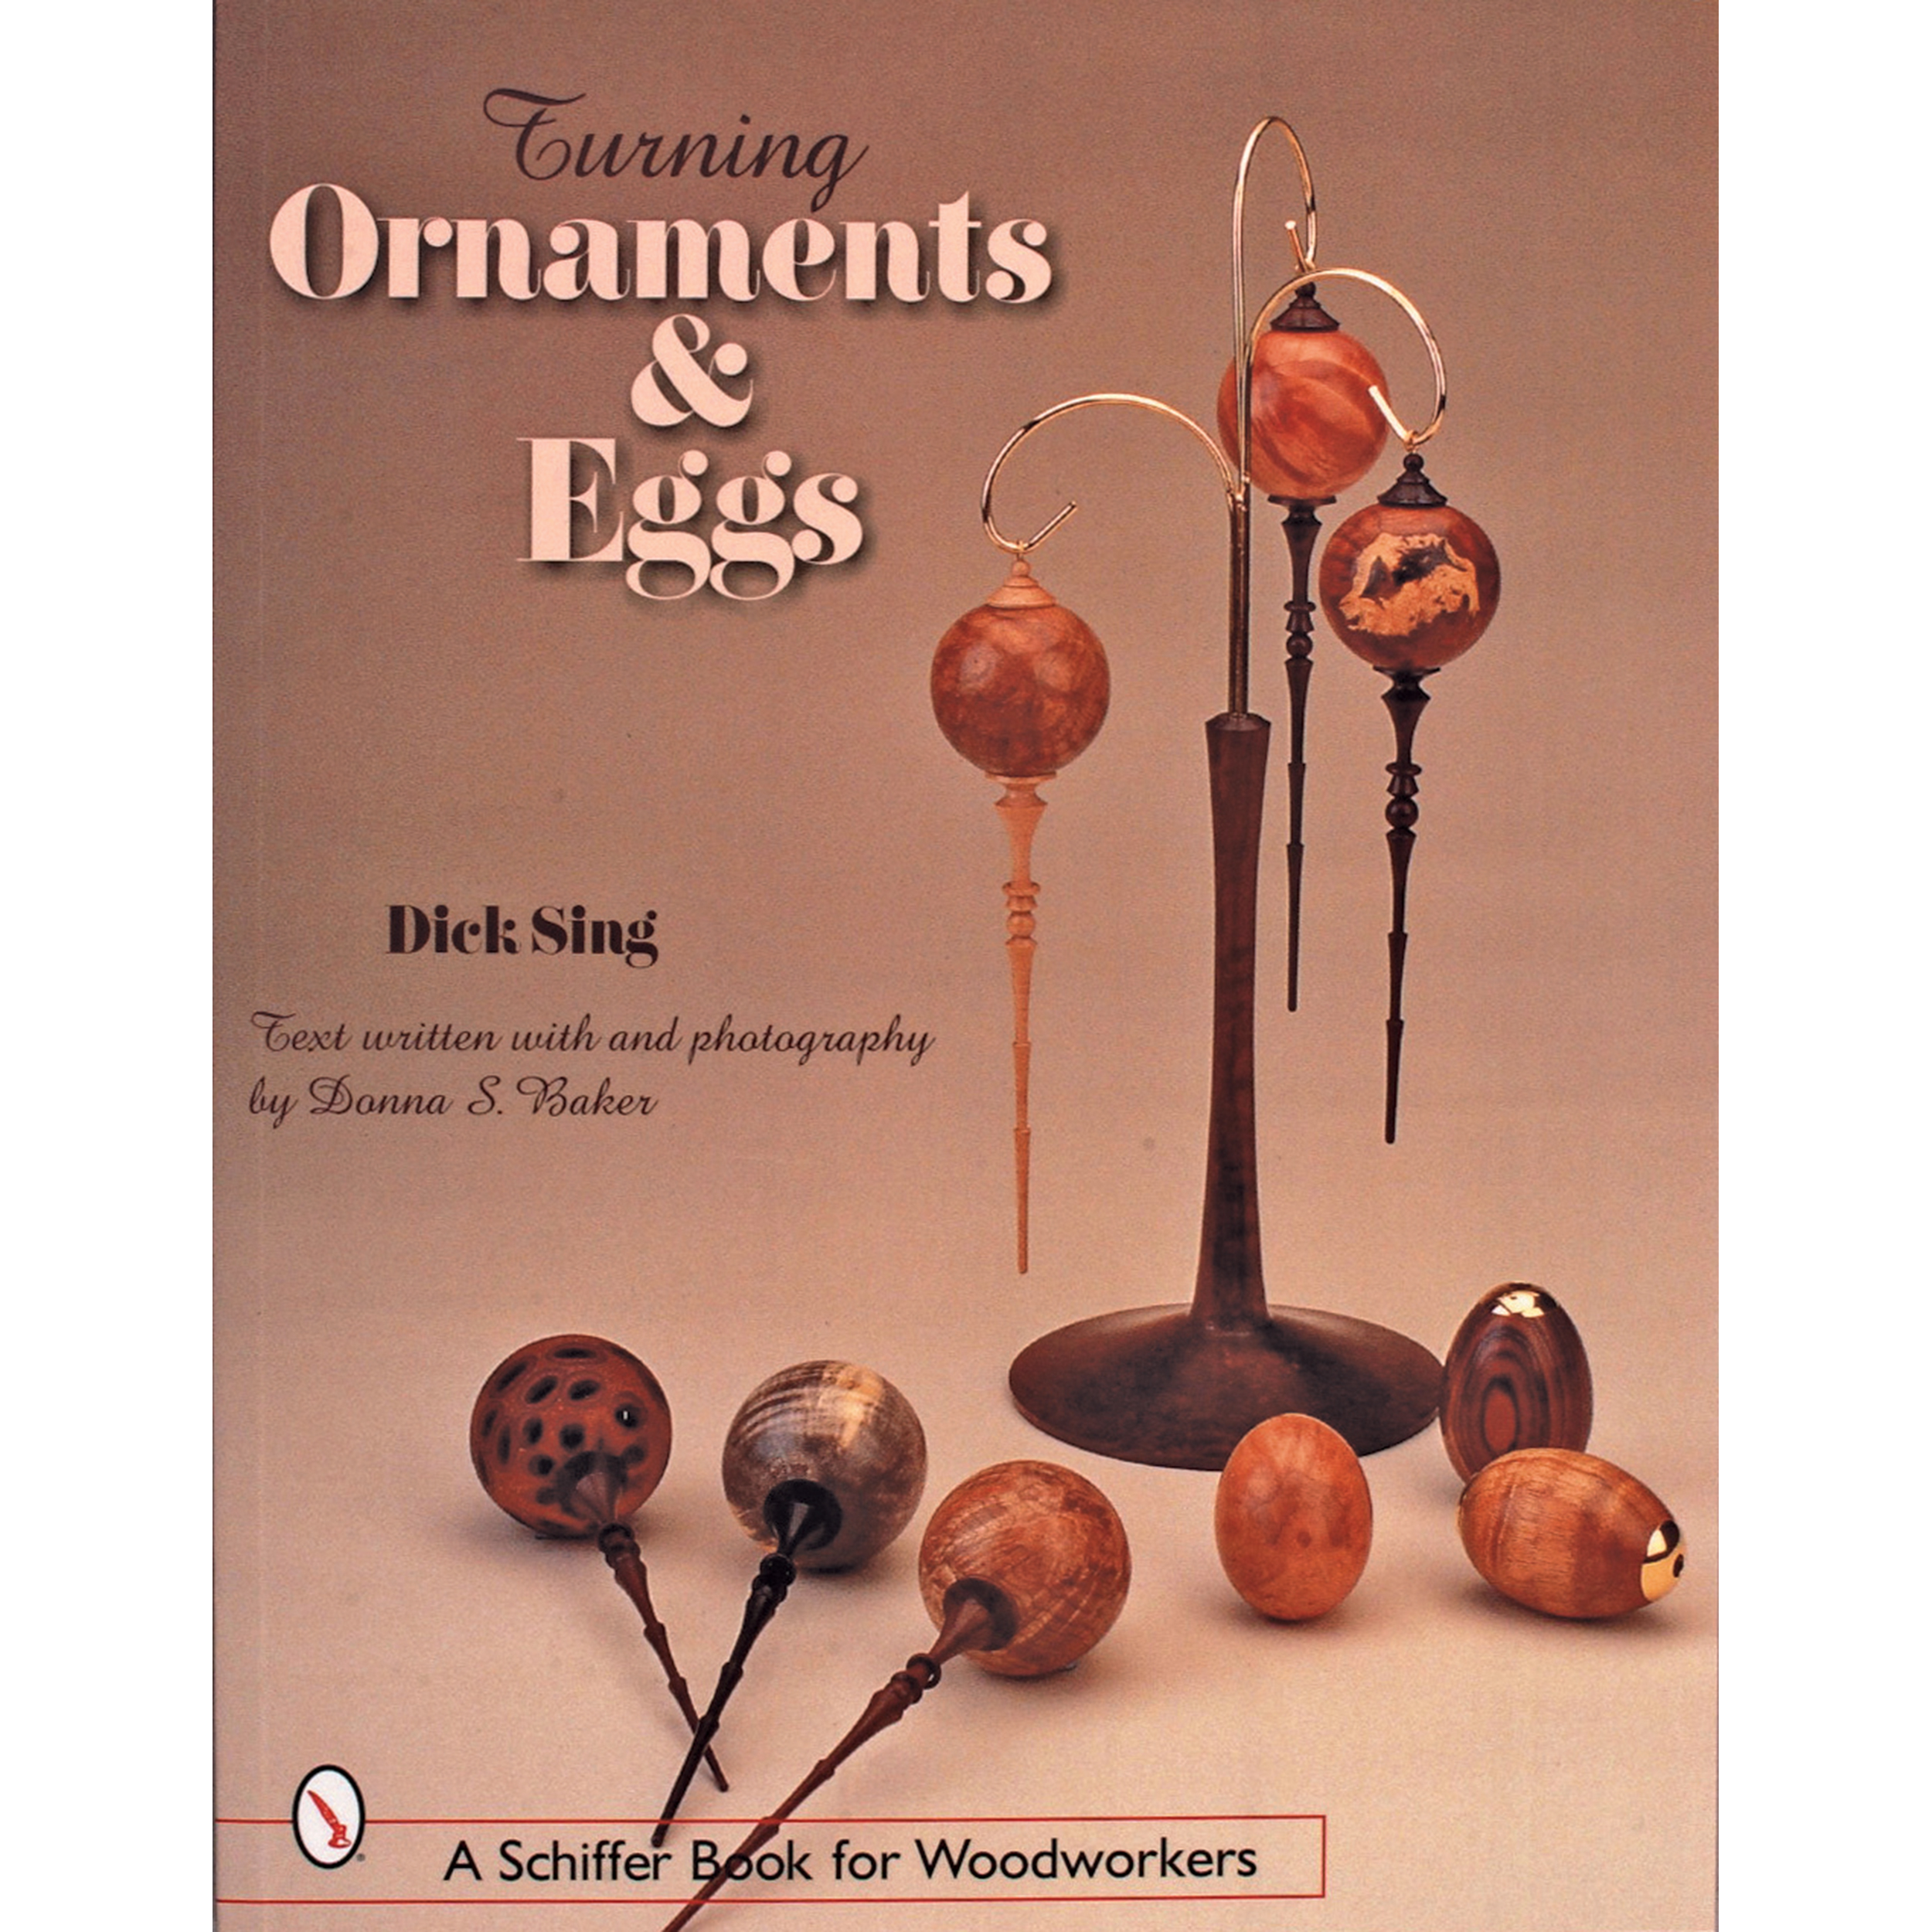 Turning Ornaments & Eggs